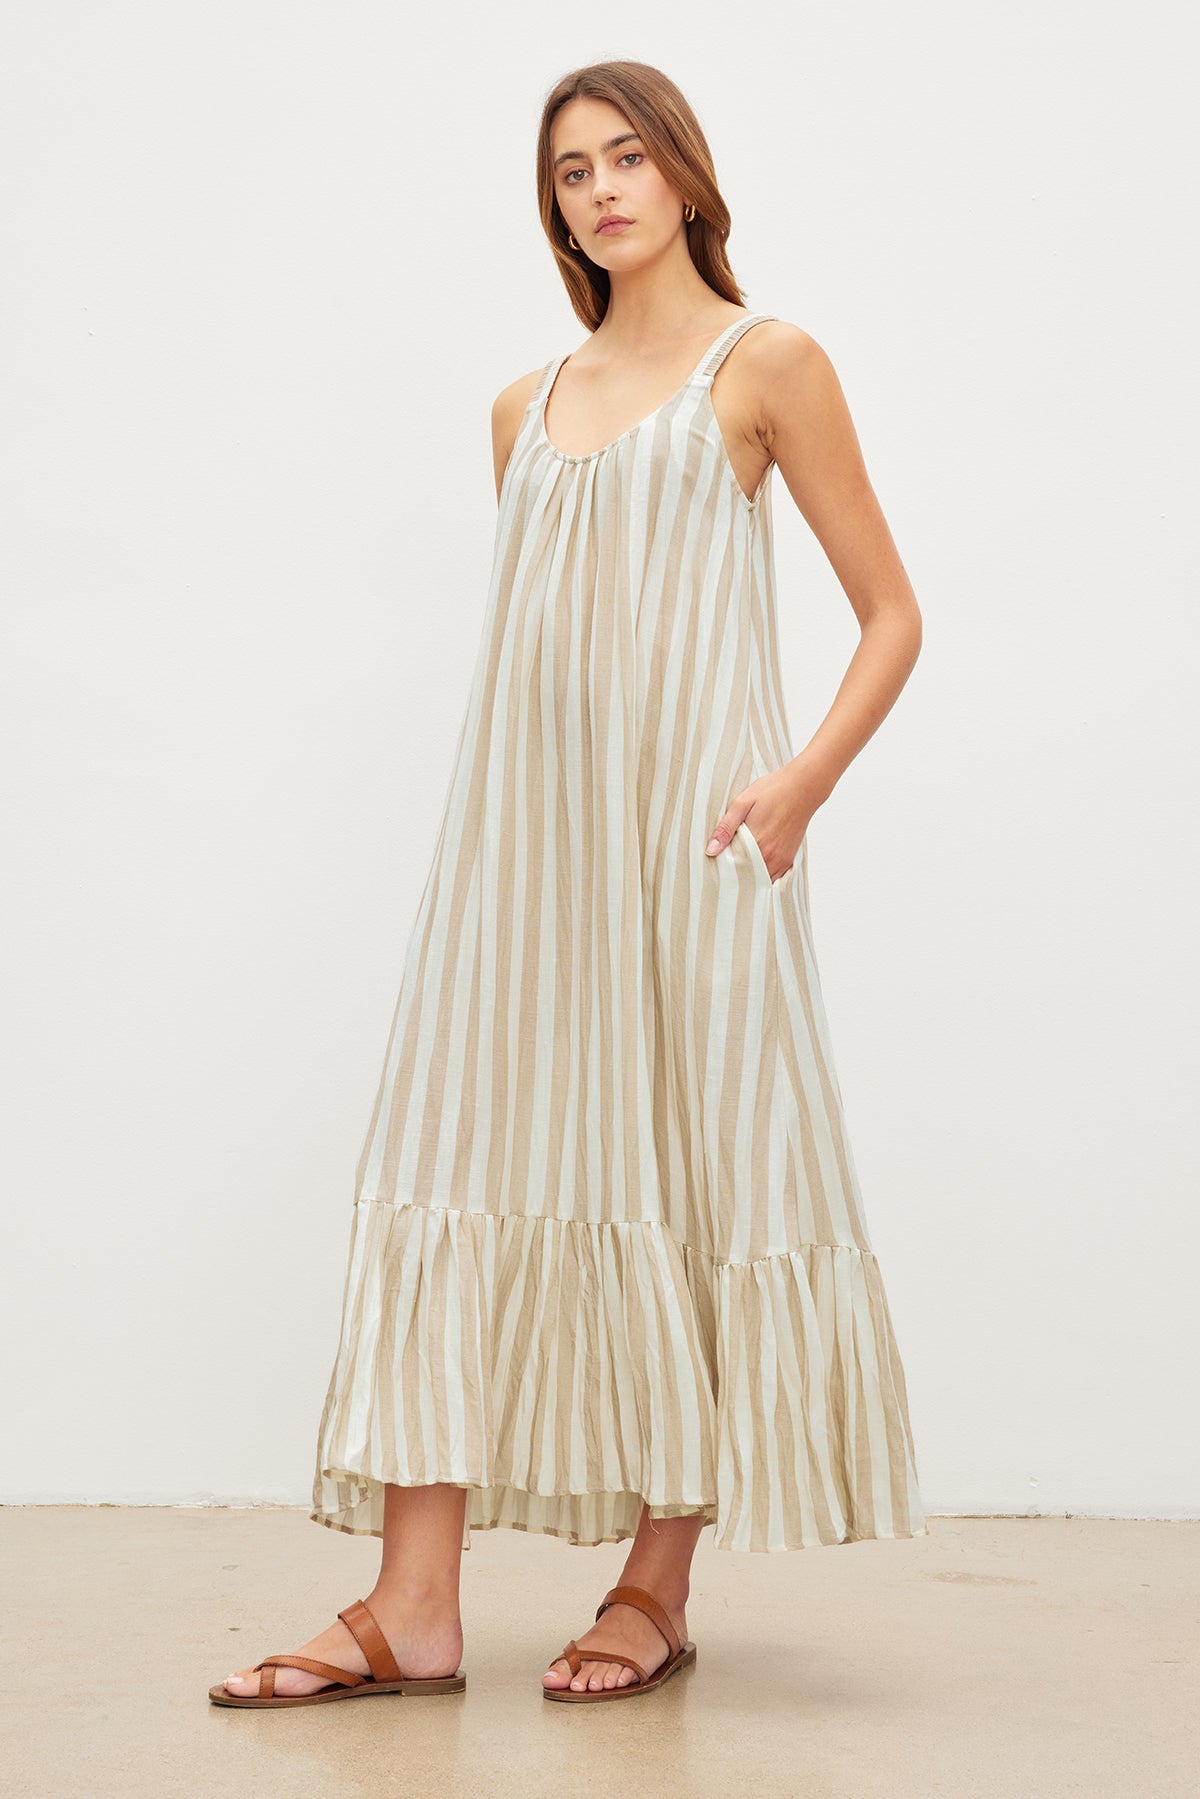   A woman in a MERADITH STRIPED LINEN MAXI DRESS by Velvet by Graham & Spencer and brown sandals standing in a neutral-toned studio. 